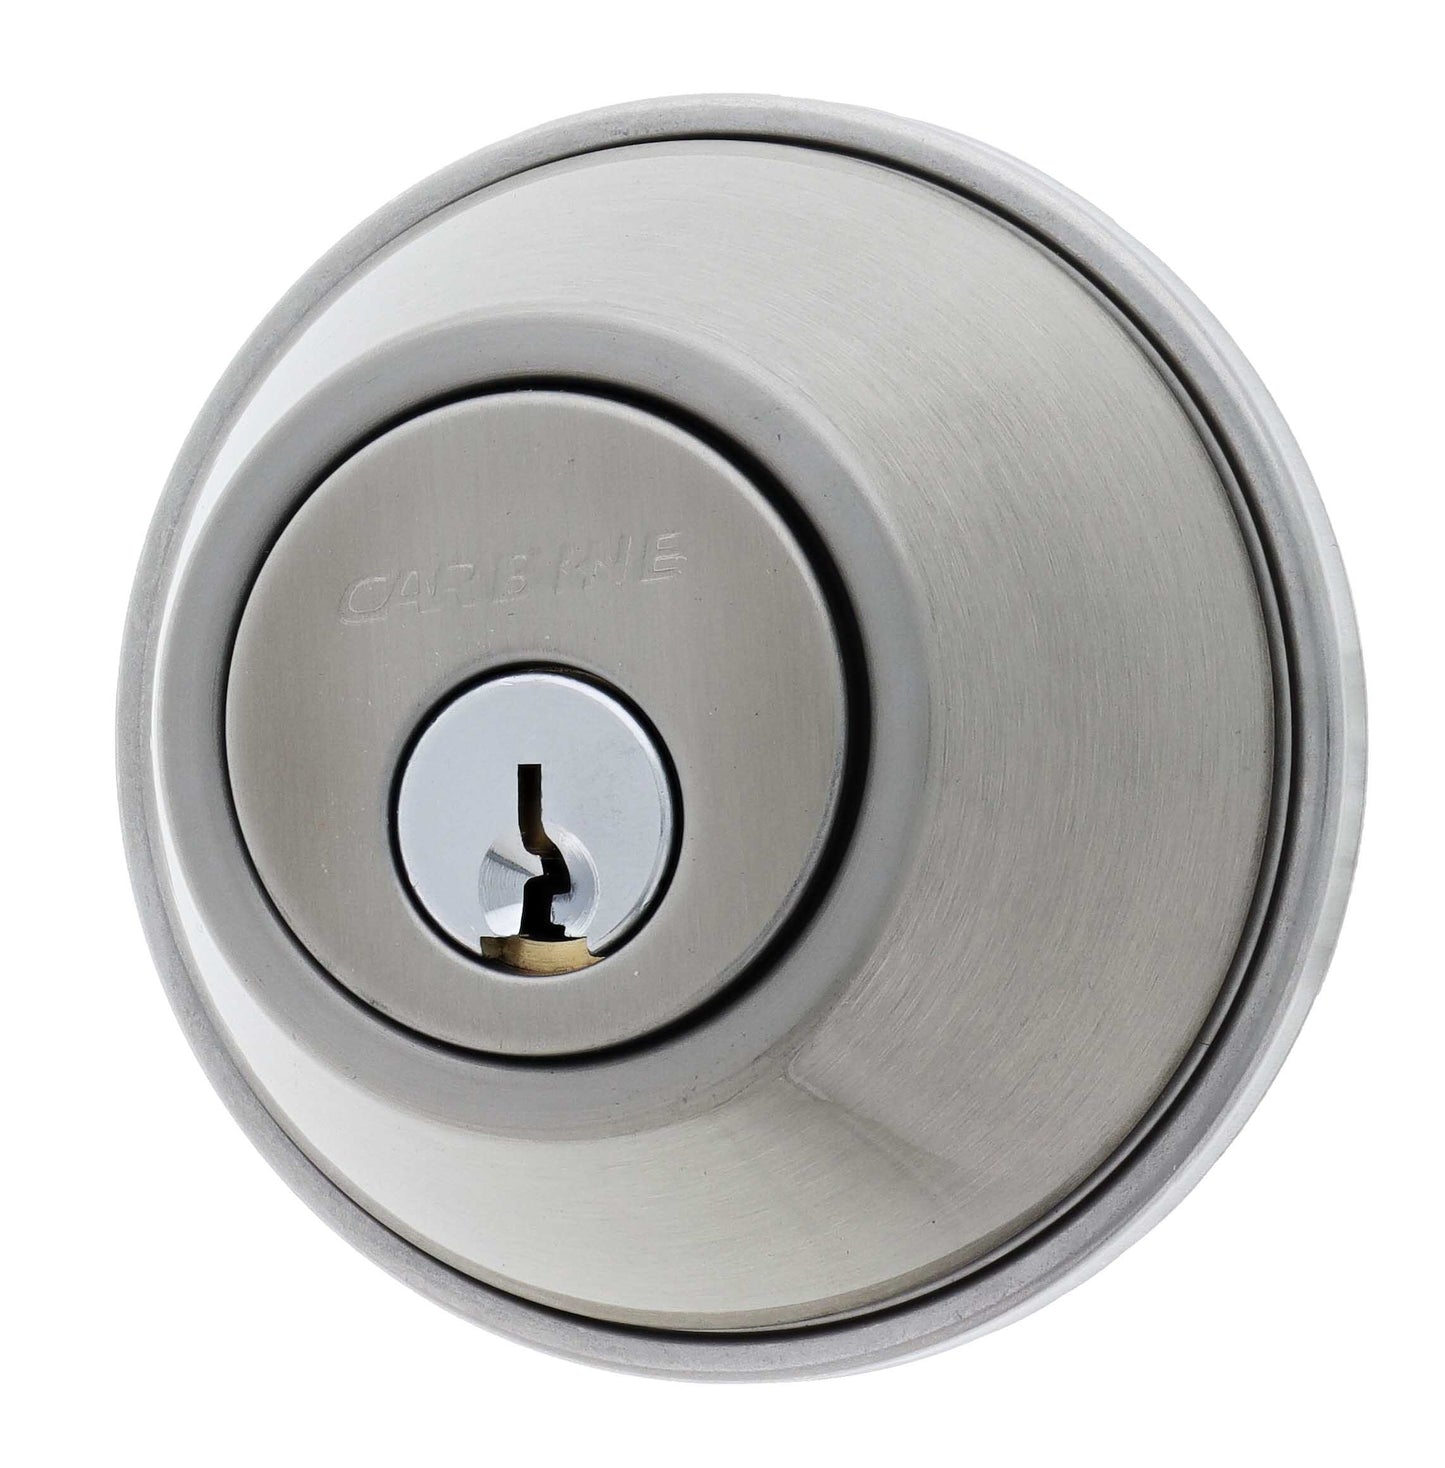 Carbine LB Residential Series Standard Double Cylinder Deadbolt, 60-70mm backset, C4 Keyed to Differ , Boxed, Satin Nickel